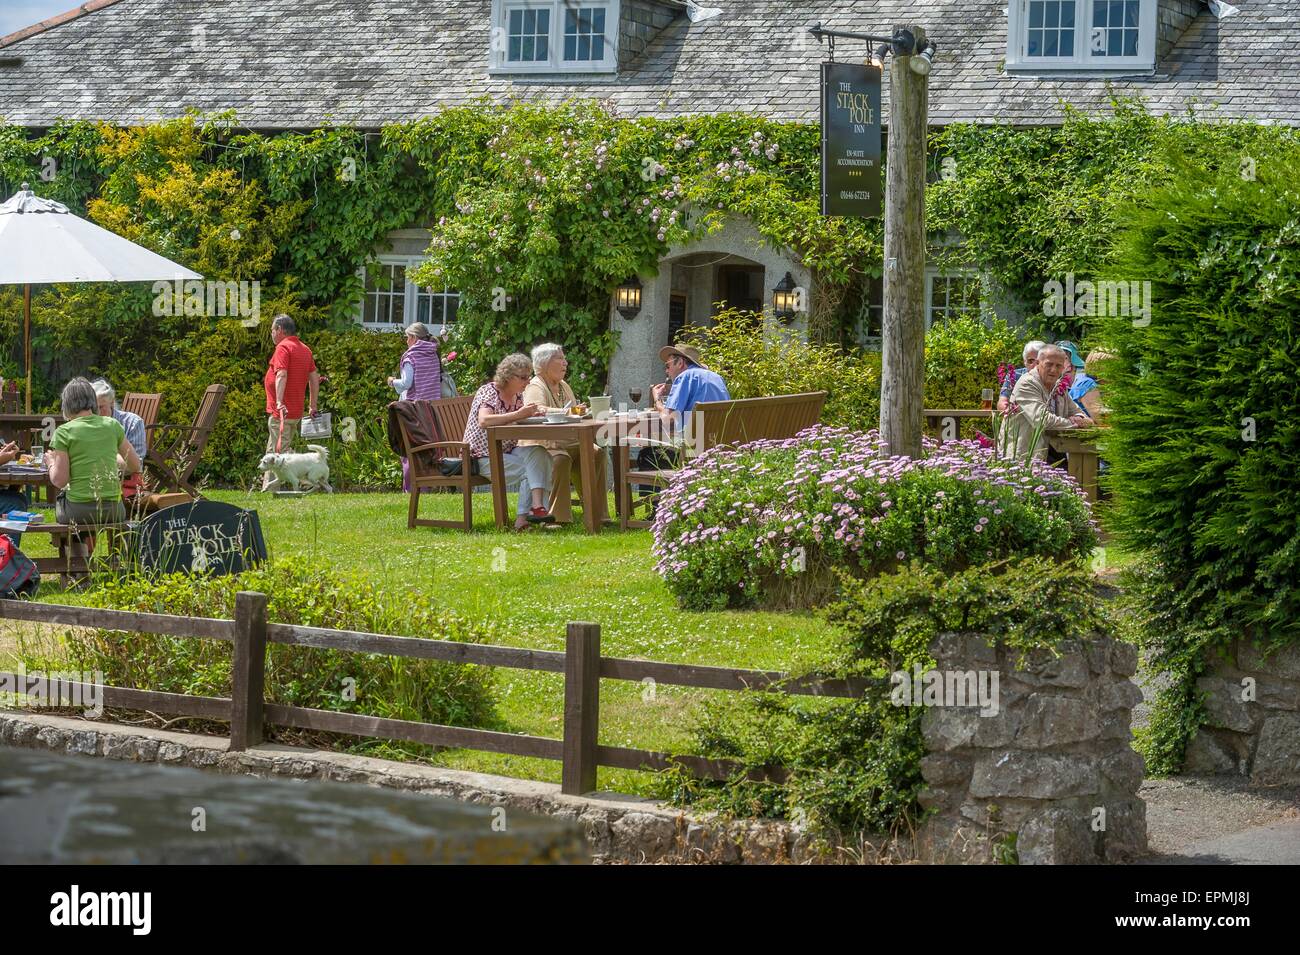 The Stackpole Inn. Pembrokeshire Coast National Park. Wales Stock Photo